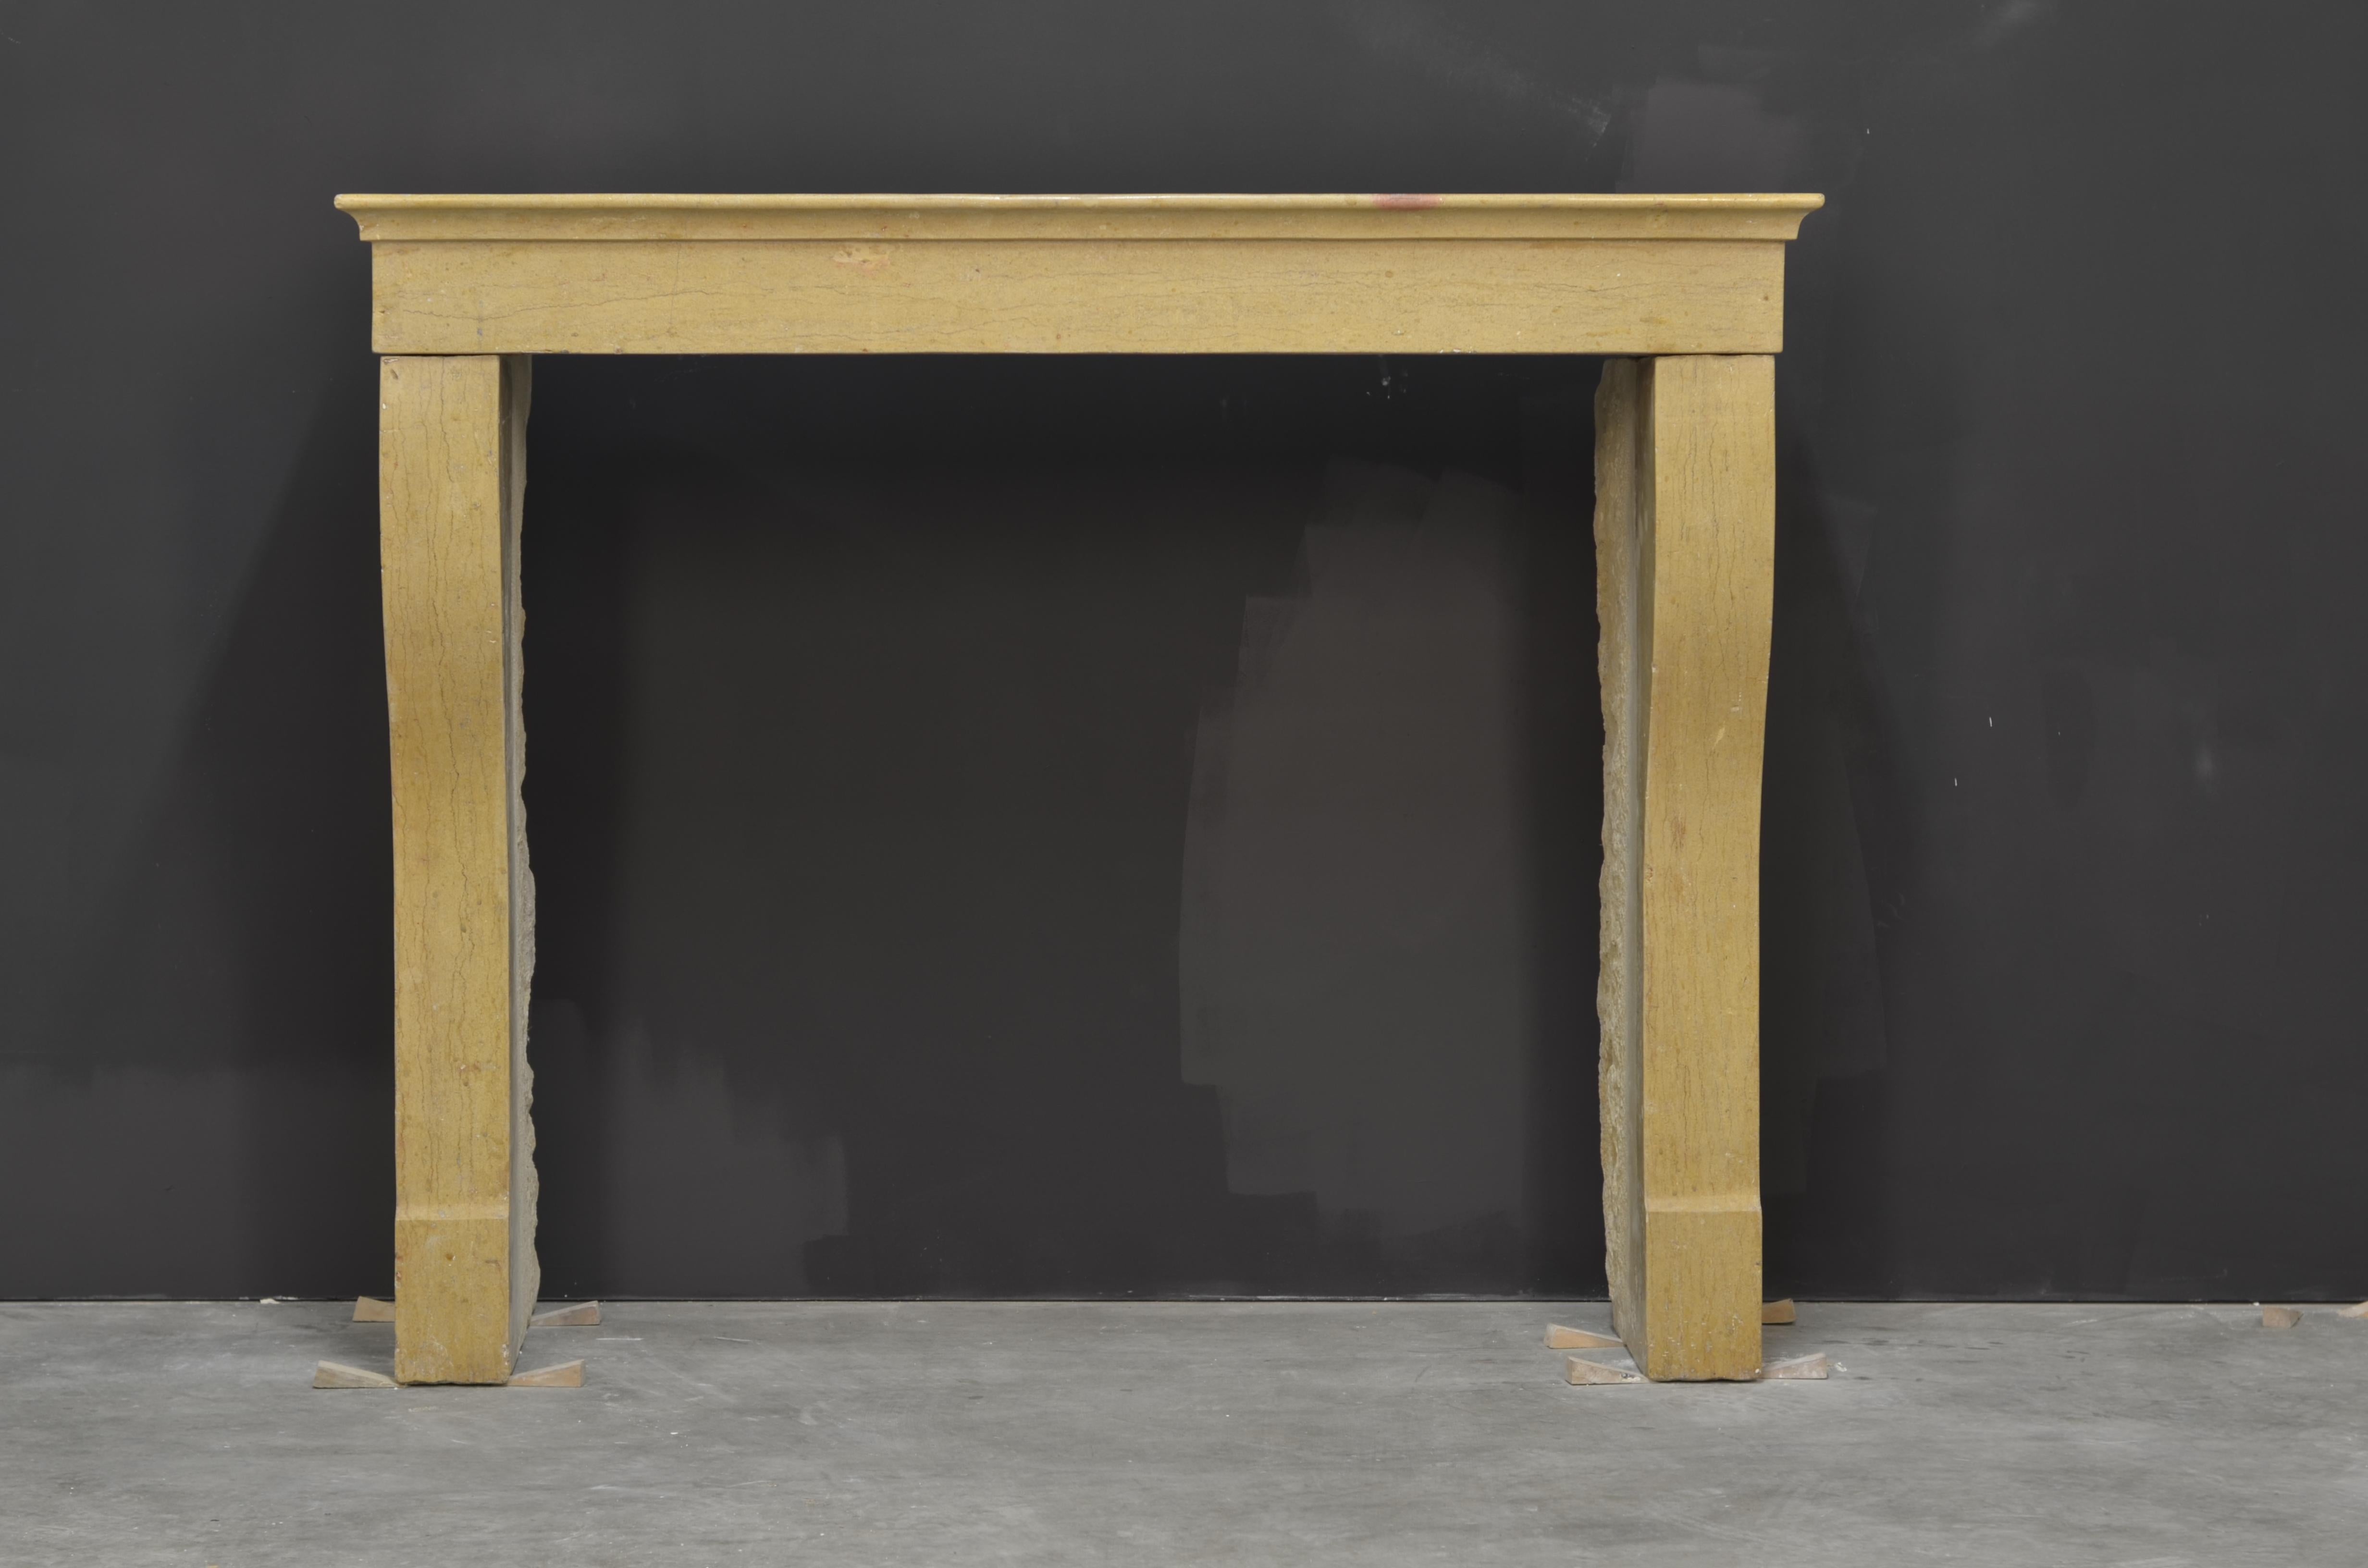 Nice French Campagnard style fireplace mantel in lovely limestone.
This gem comes from central France, burgundy area.
Its perfect size make it possible to install this mantel in almost any situation.
Overall nice condition and patina.

Ready to